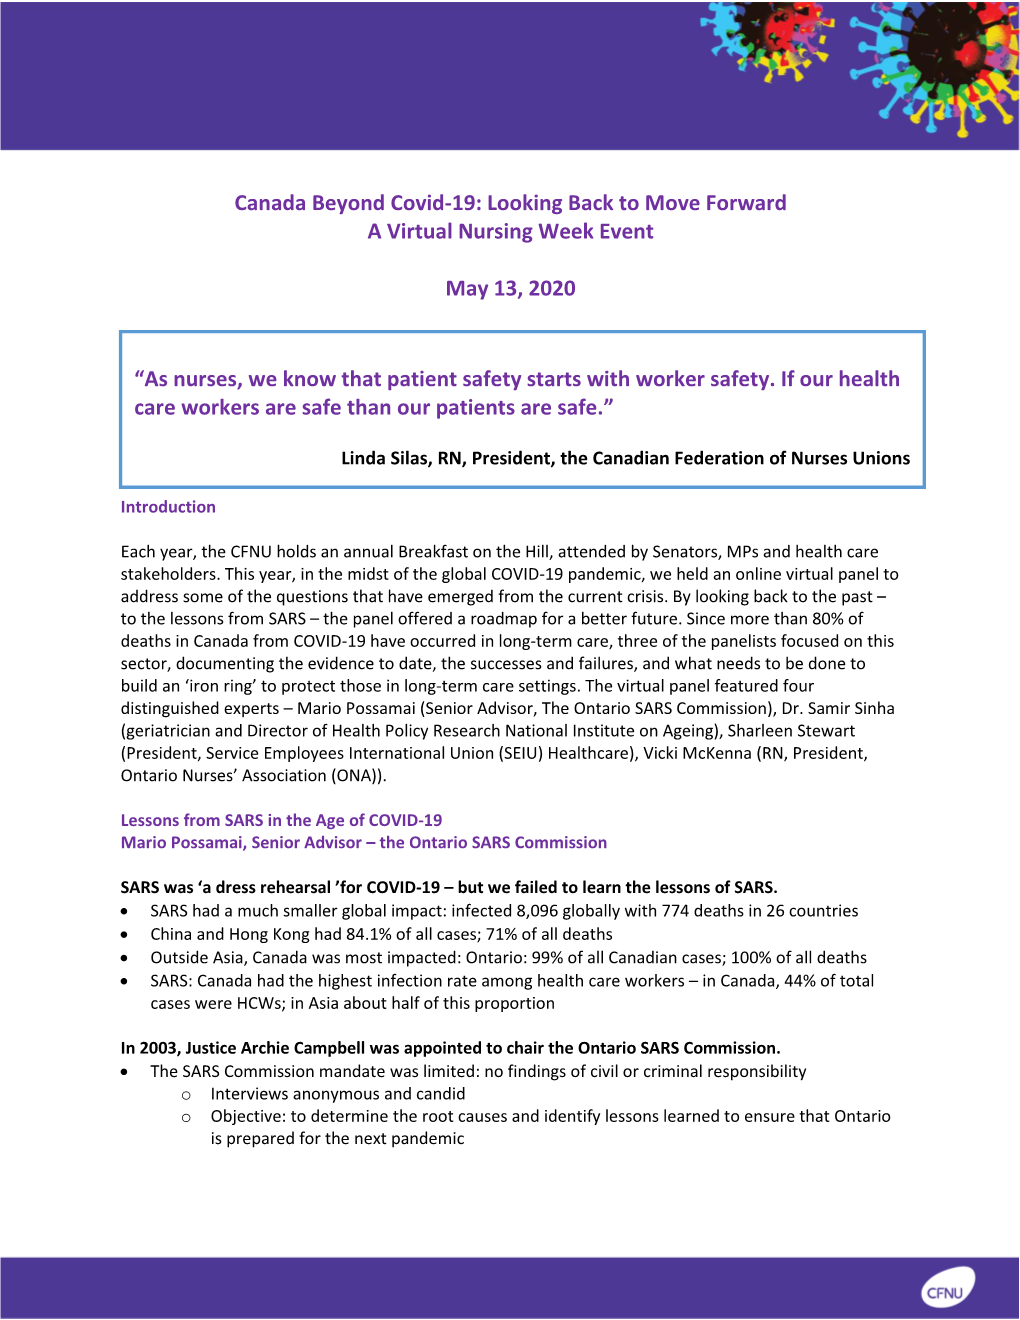 Canada Beyond Covid-19: Looking Back to Move Forward a Virtual Nursing Week Event May 13, 2020